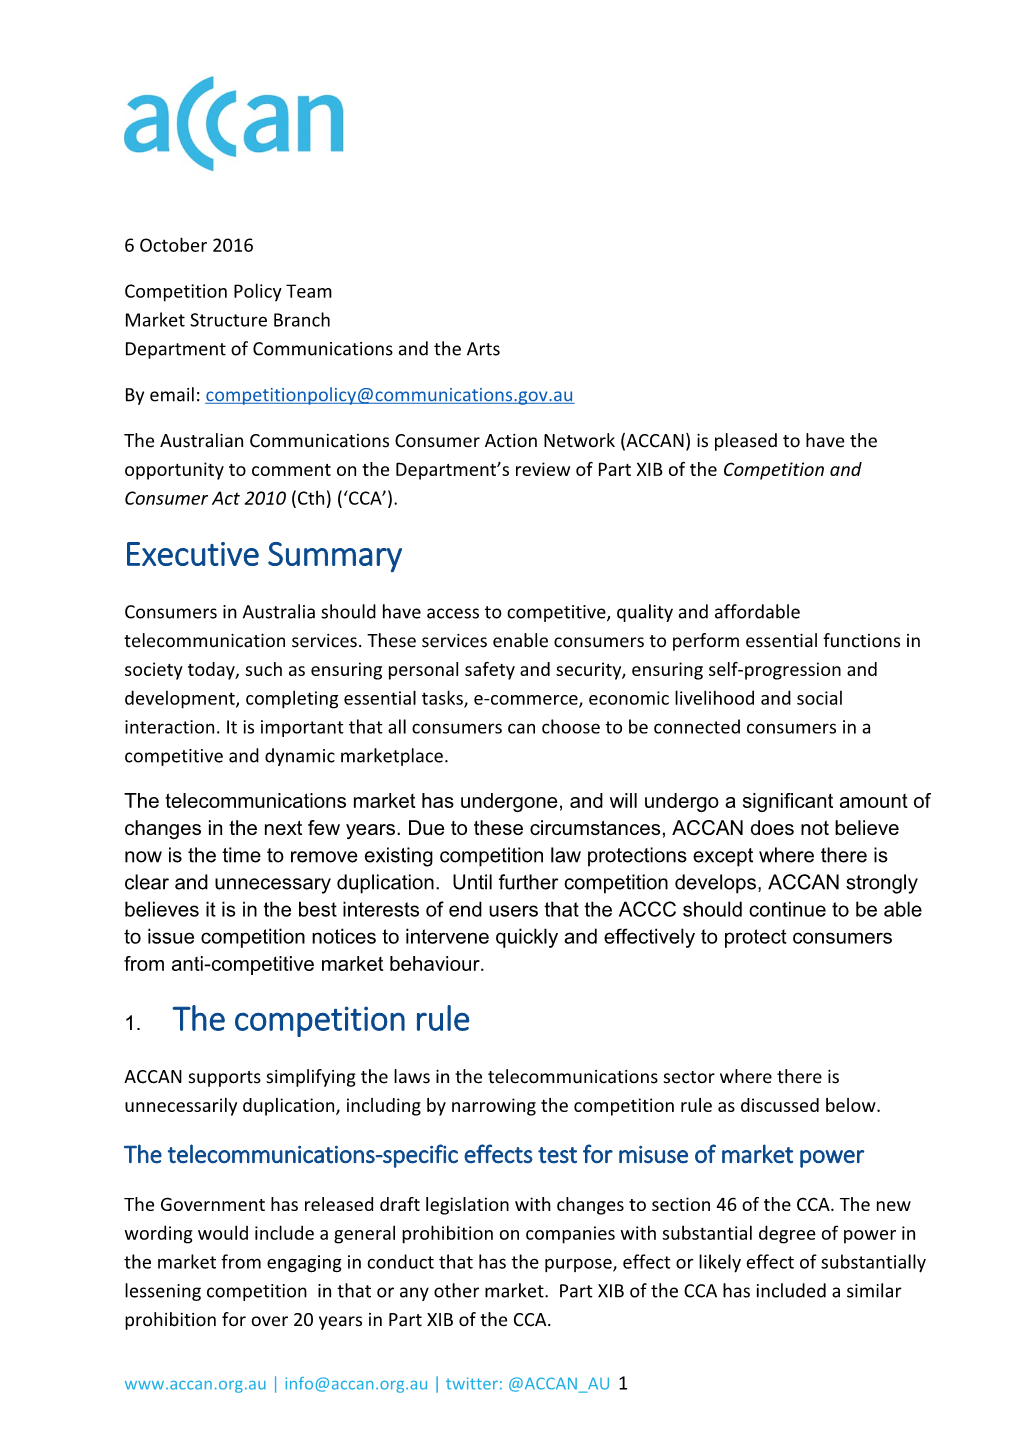 Review of the Part XIB Telecommunications Anti-Competitive Conduct Provisions Response